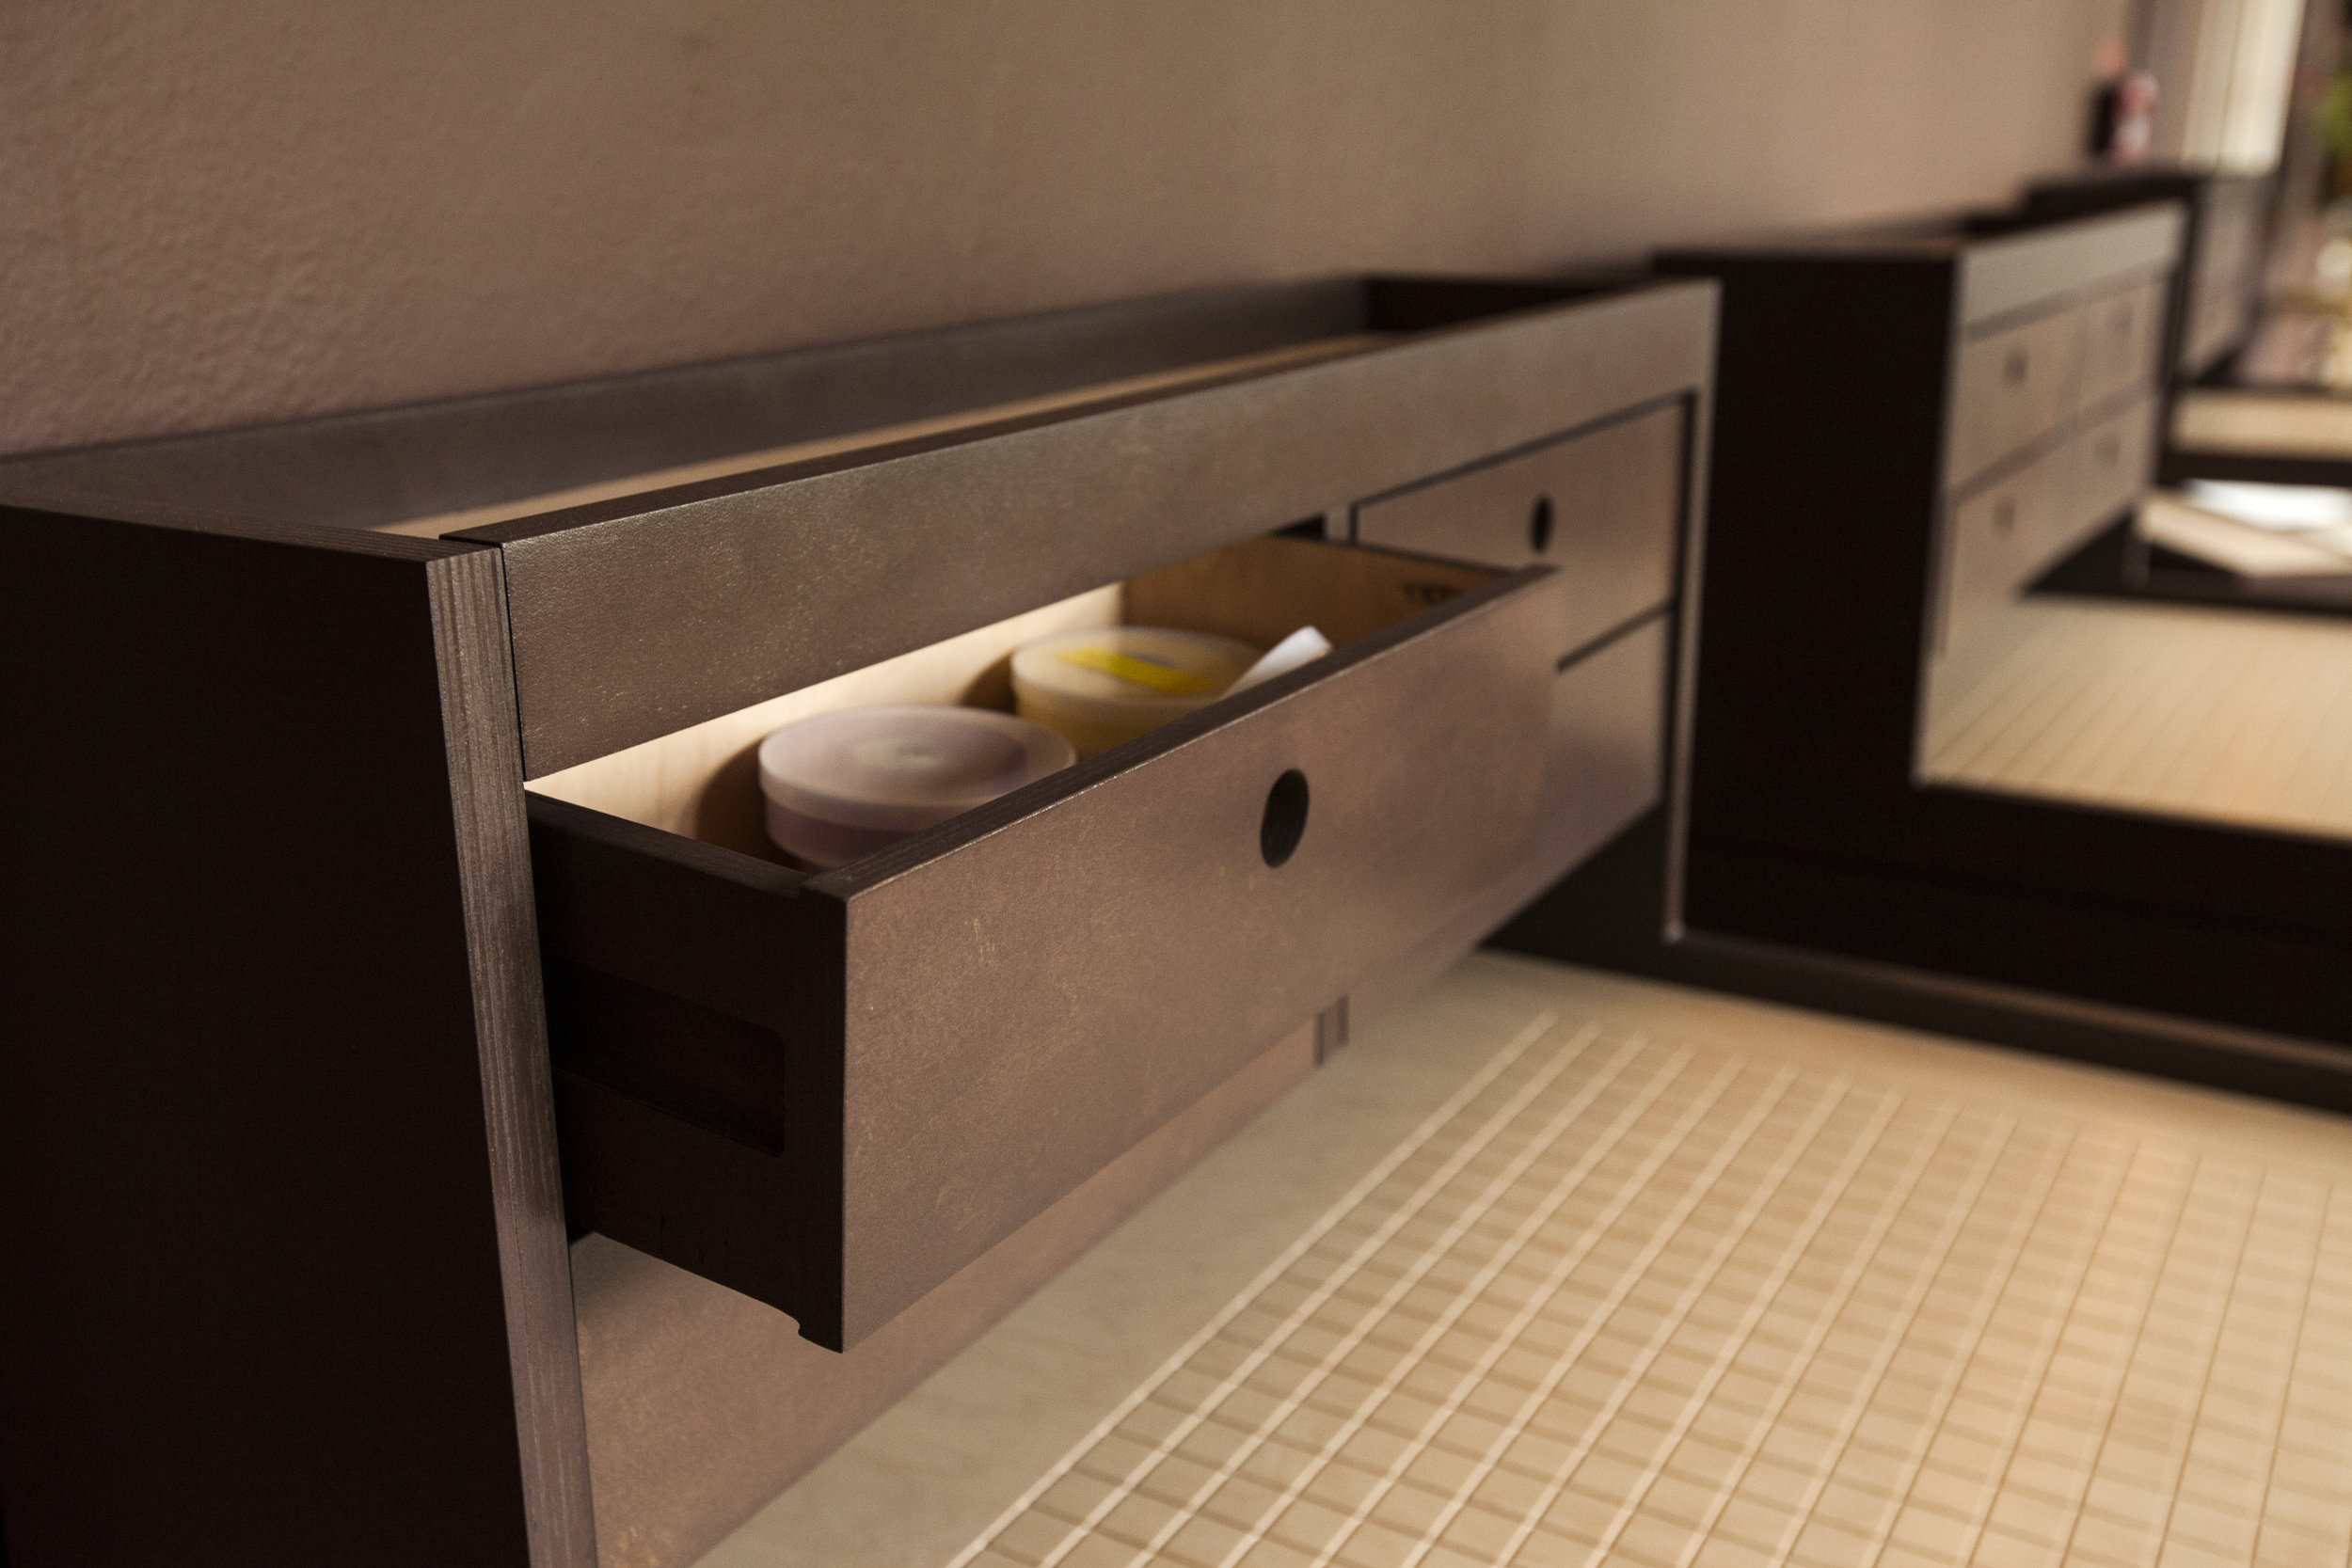  Simple all wood glide drawers reference the architectural time period of the building. 